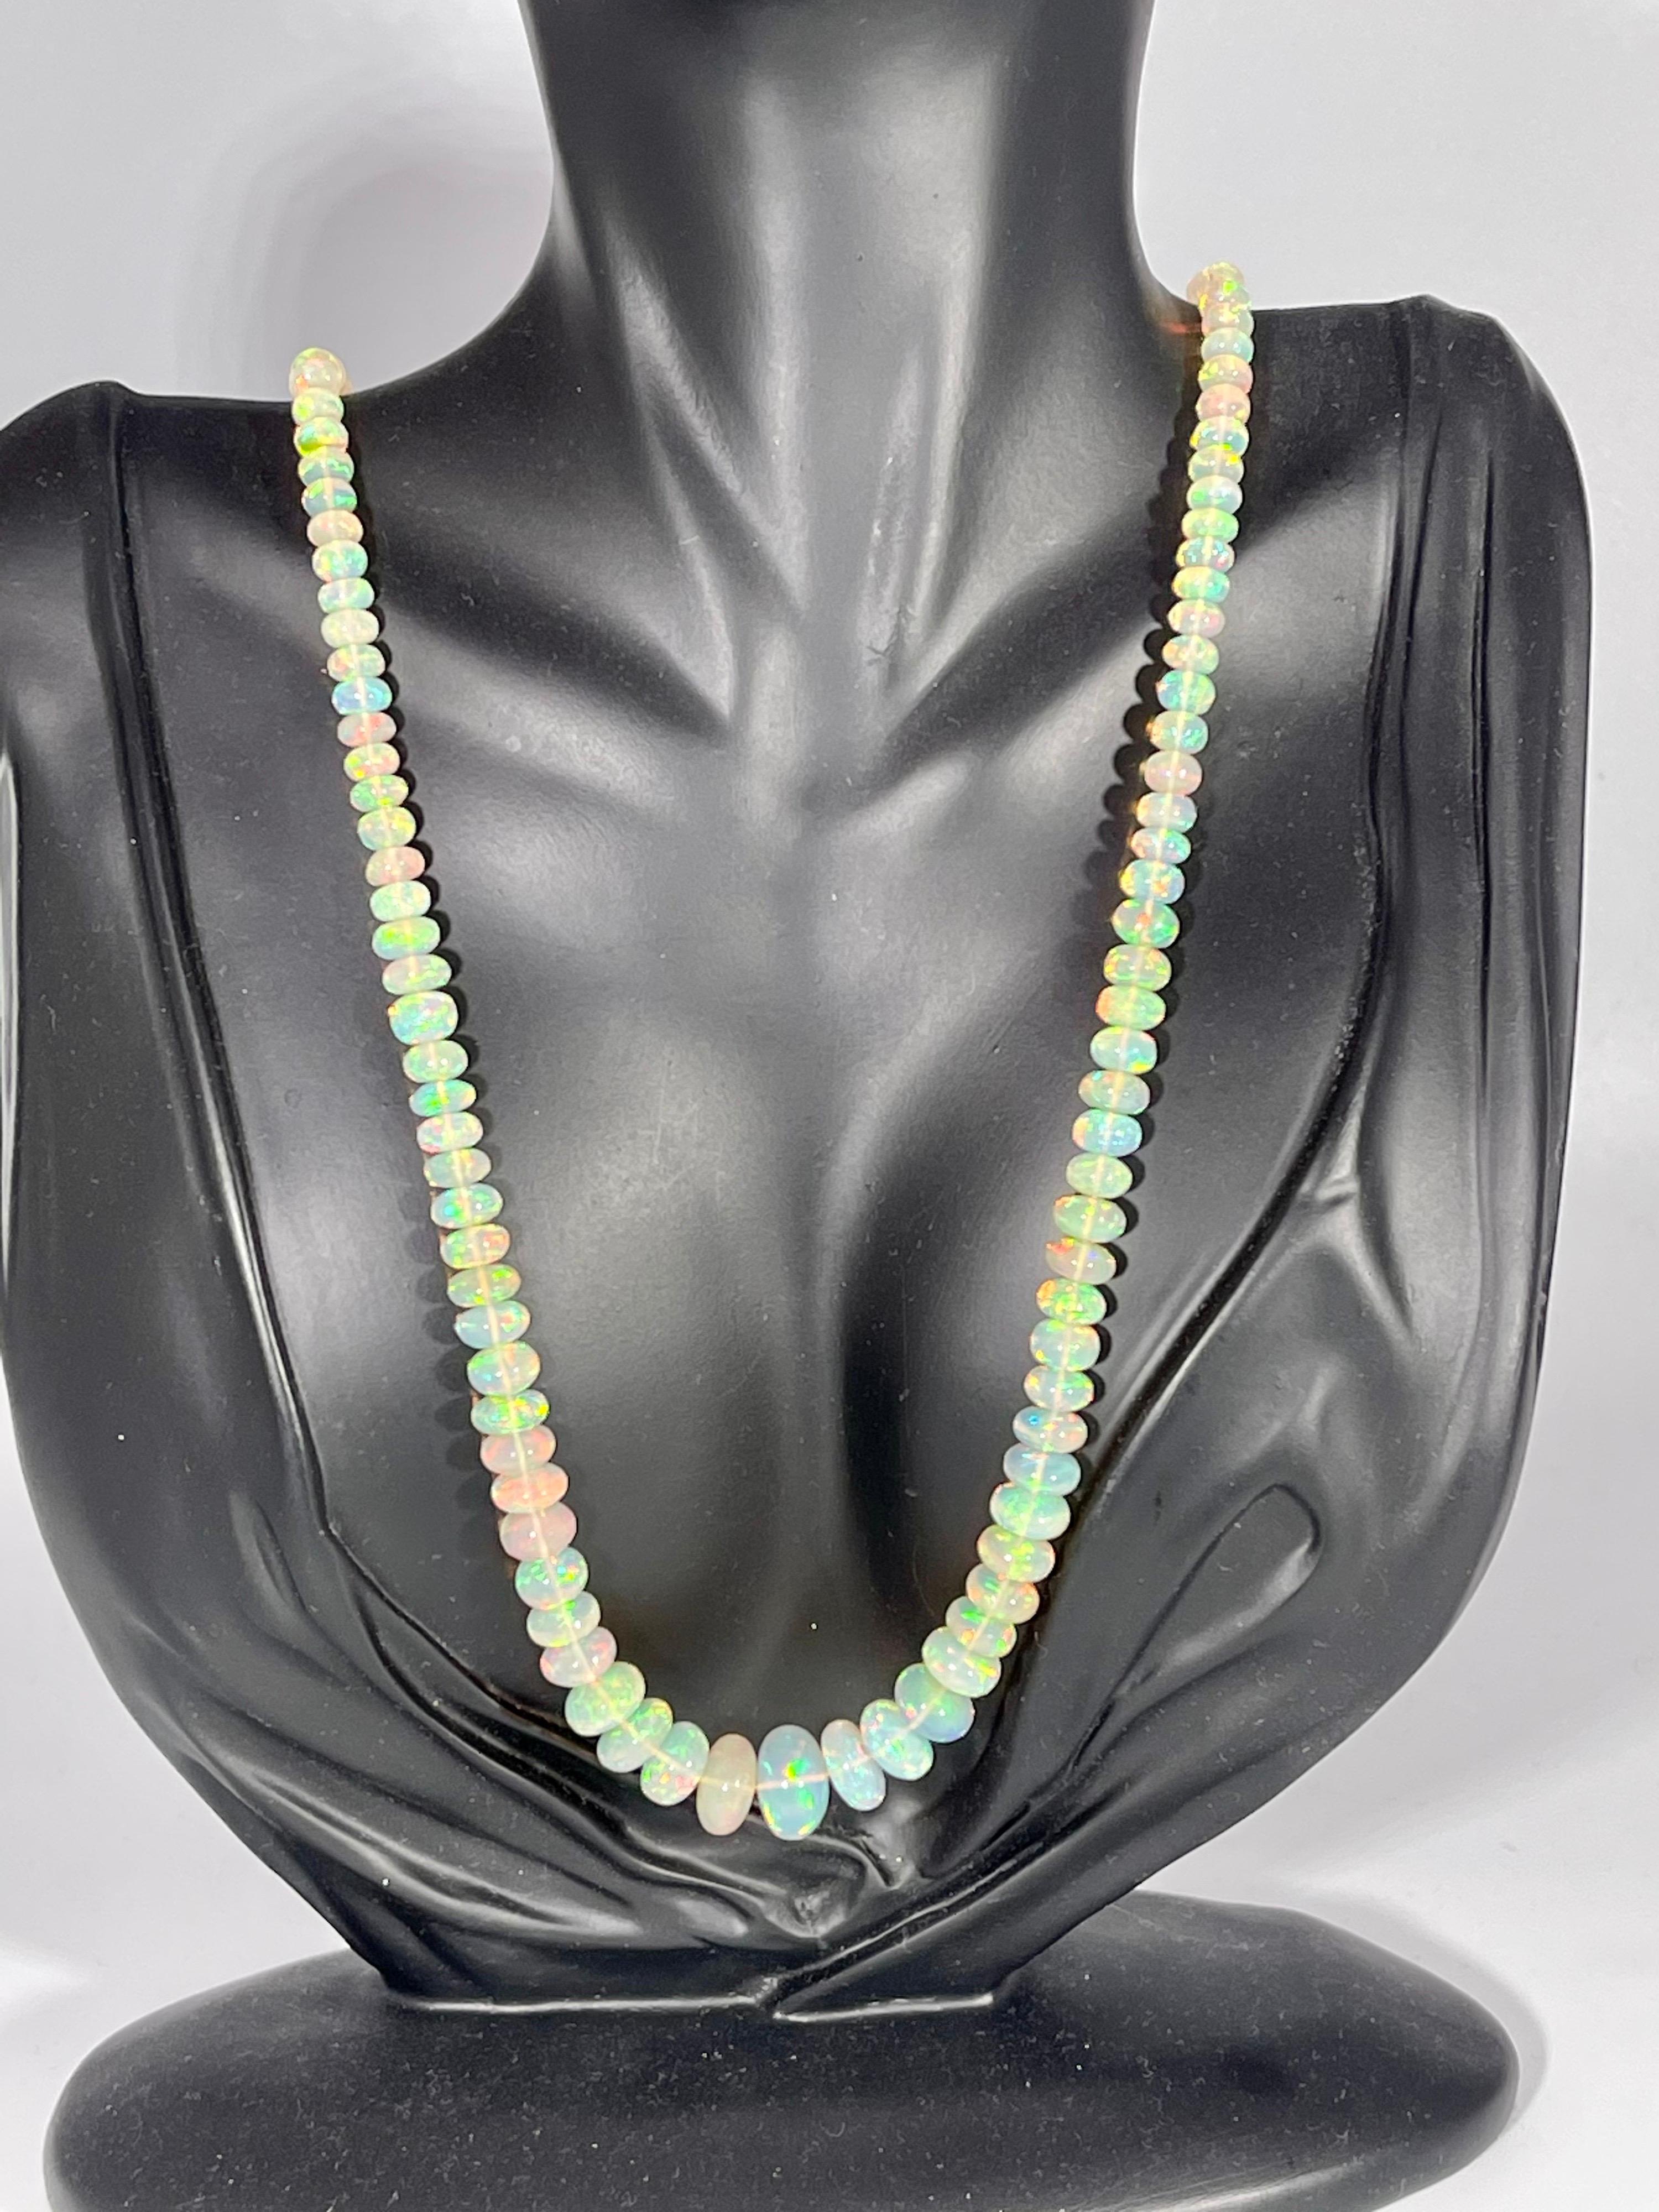 Natural 115 Ct Ethiopian Opal Bead Single Strand Necklace 14 Karat Yellow Gold For Sale 4